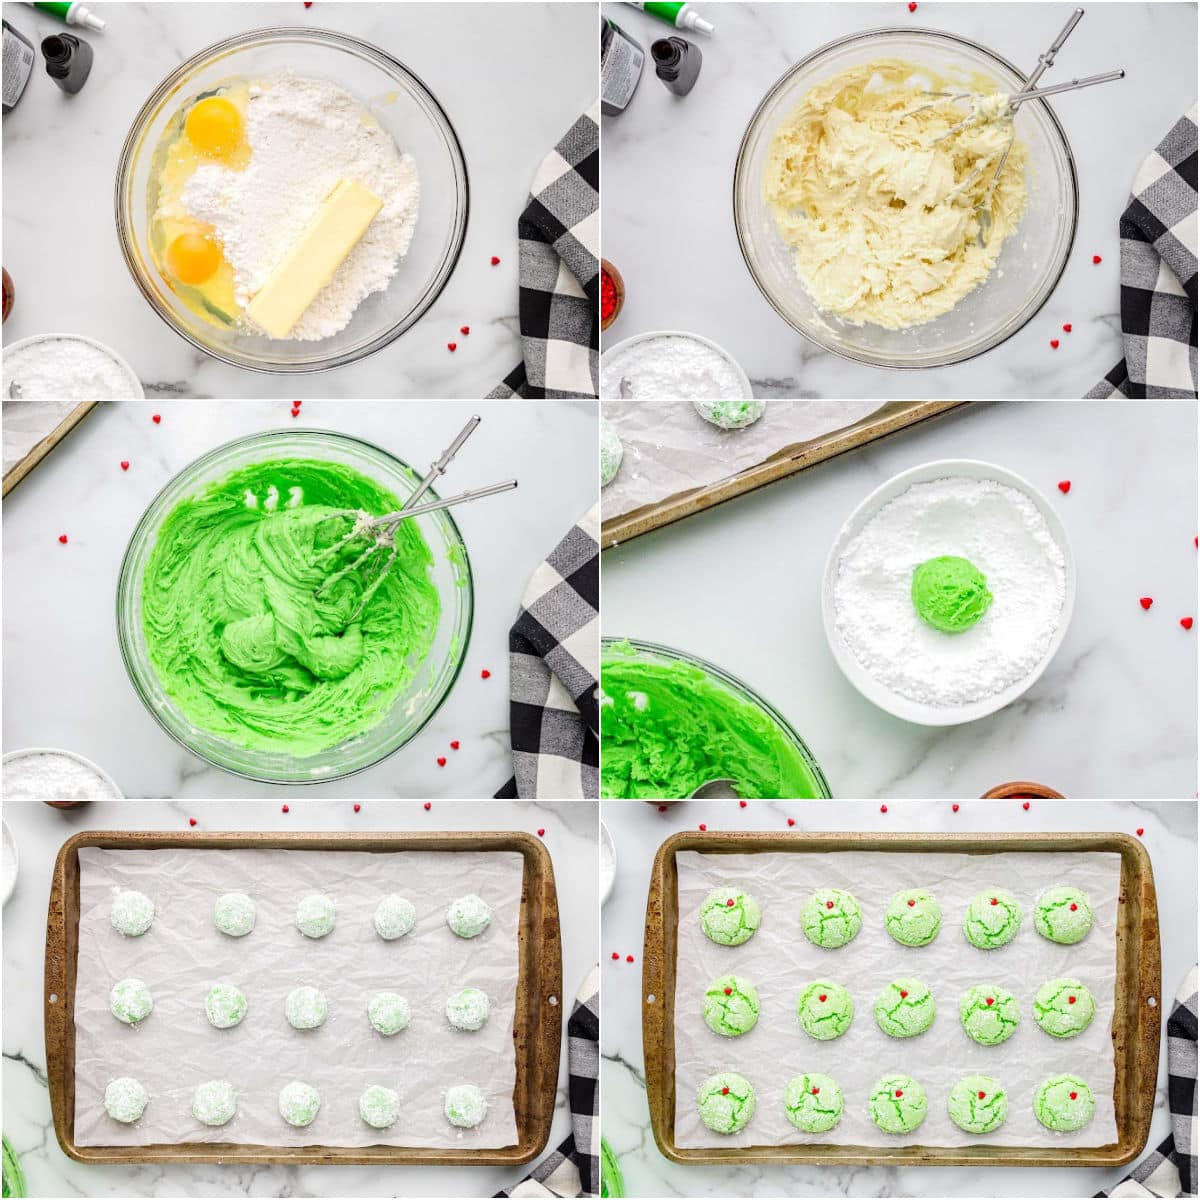 six image collage showing how to make grinch cookies which are green cake mix cookies with a red heart sprinkle.